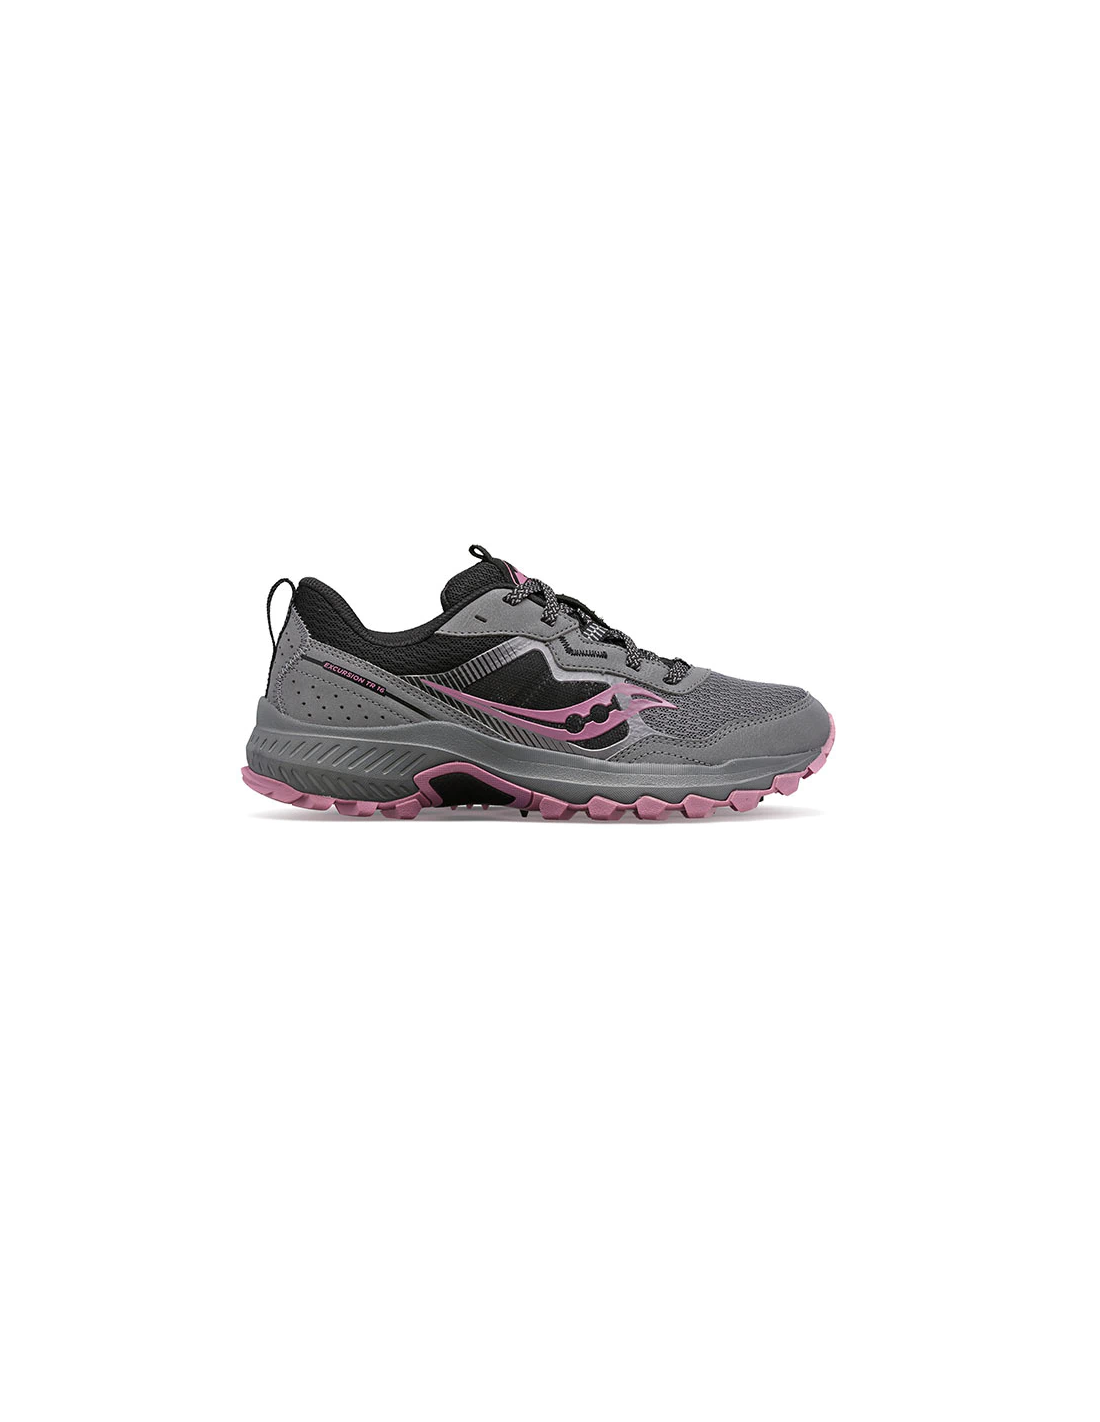 Zapatilla Saucony Excursion Tr16 Mujer Trail Charcoal/rose S10744-20